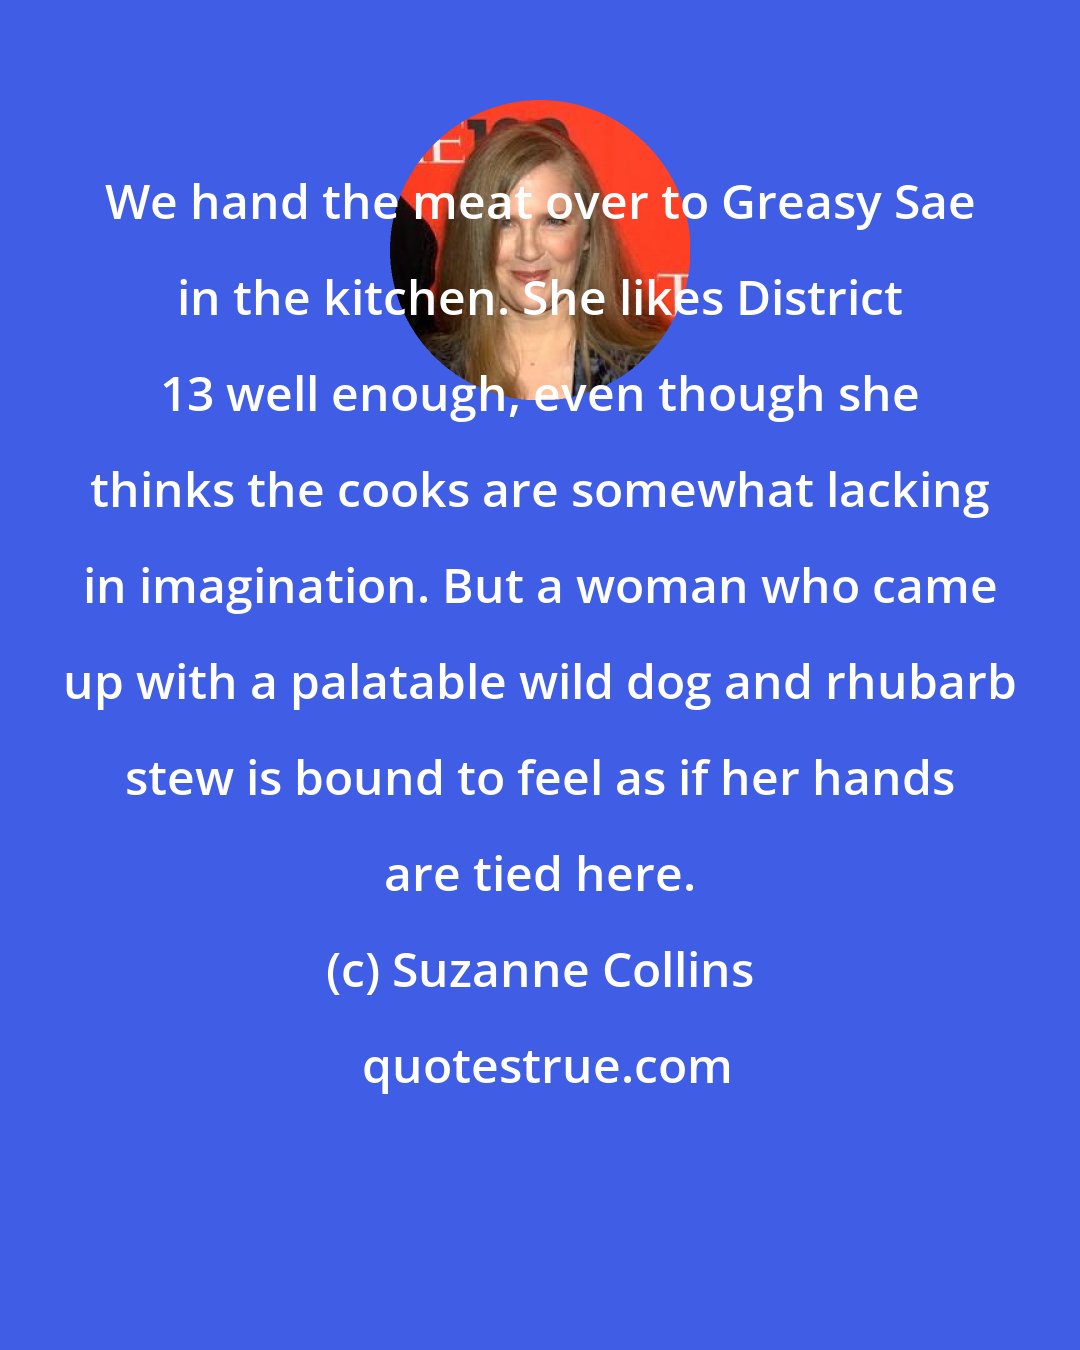 Suzanne Collins: We hand the meat over to Greasy Sae in the kitchen. She likes District 13 well enough, even though she thinks the cooks are somewhat lacking in imagination. But a woman who came up with a palatable wild dog and rhubarb stew is bound to feel as if her hands are tied here.